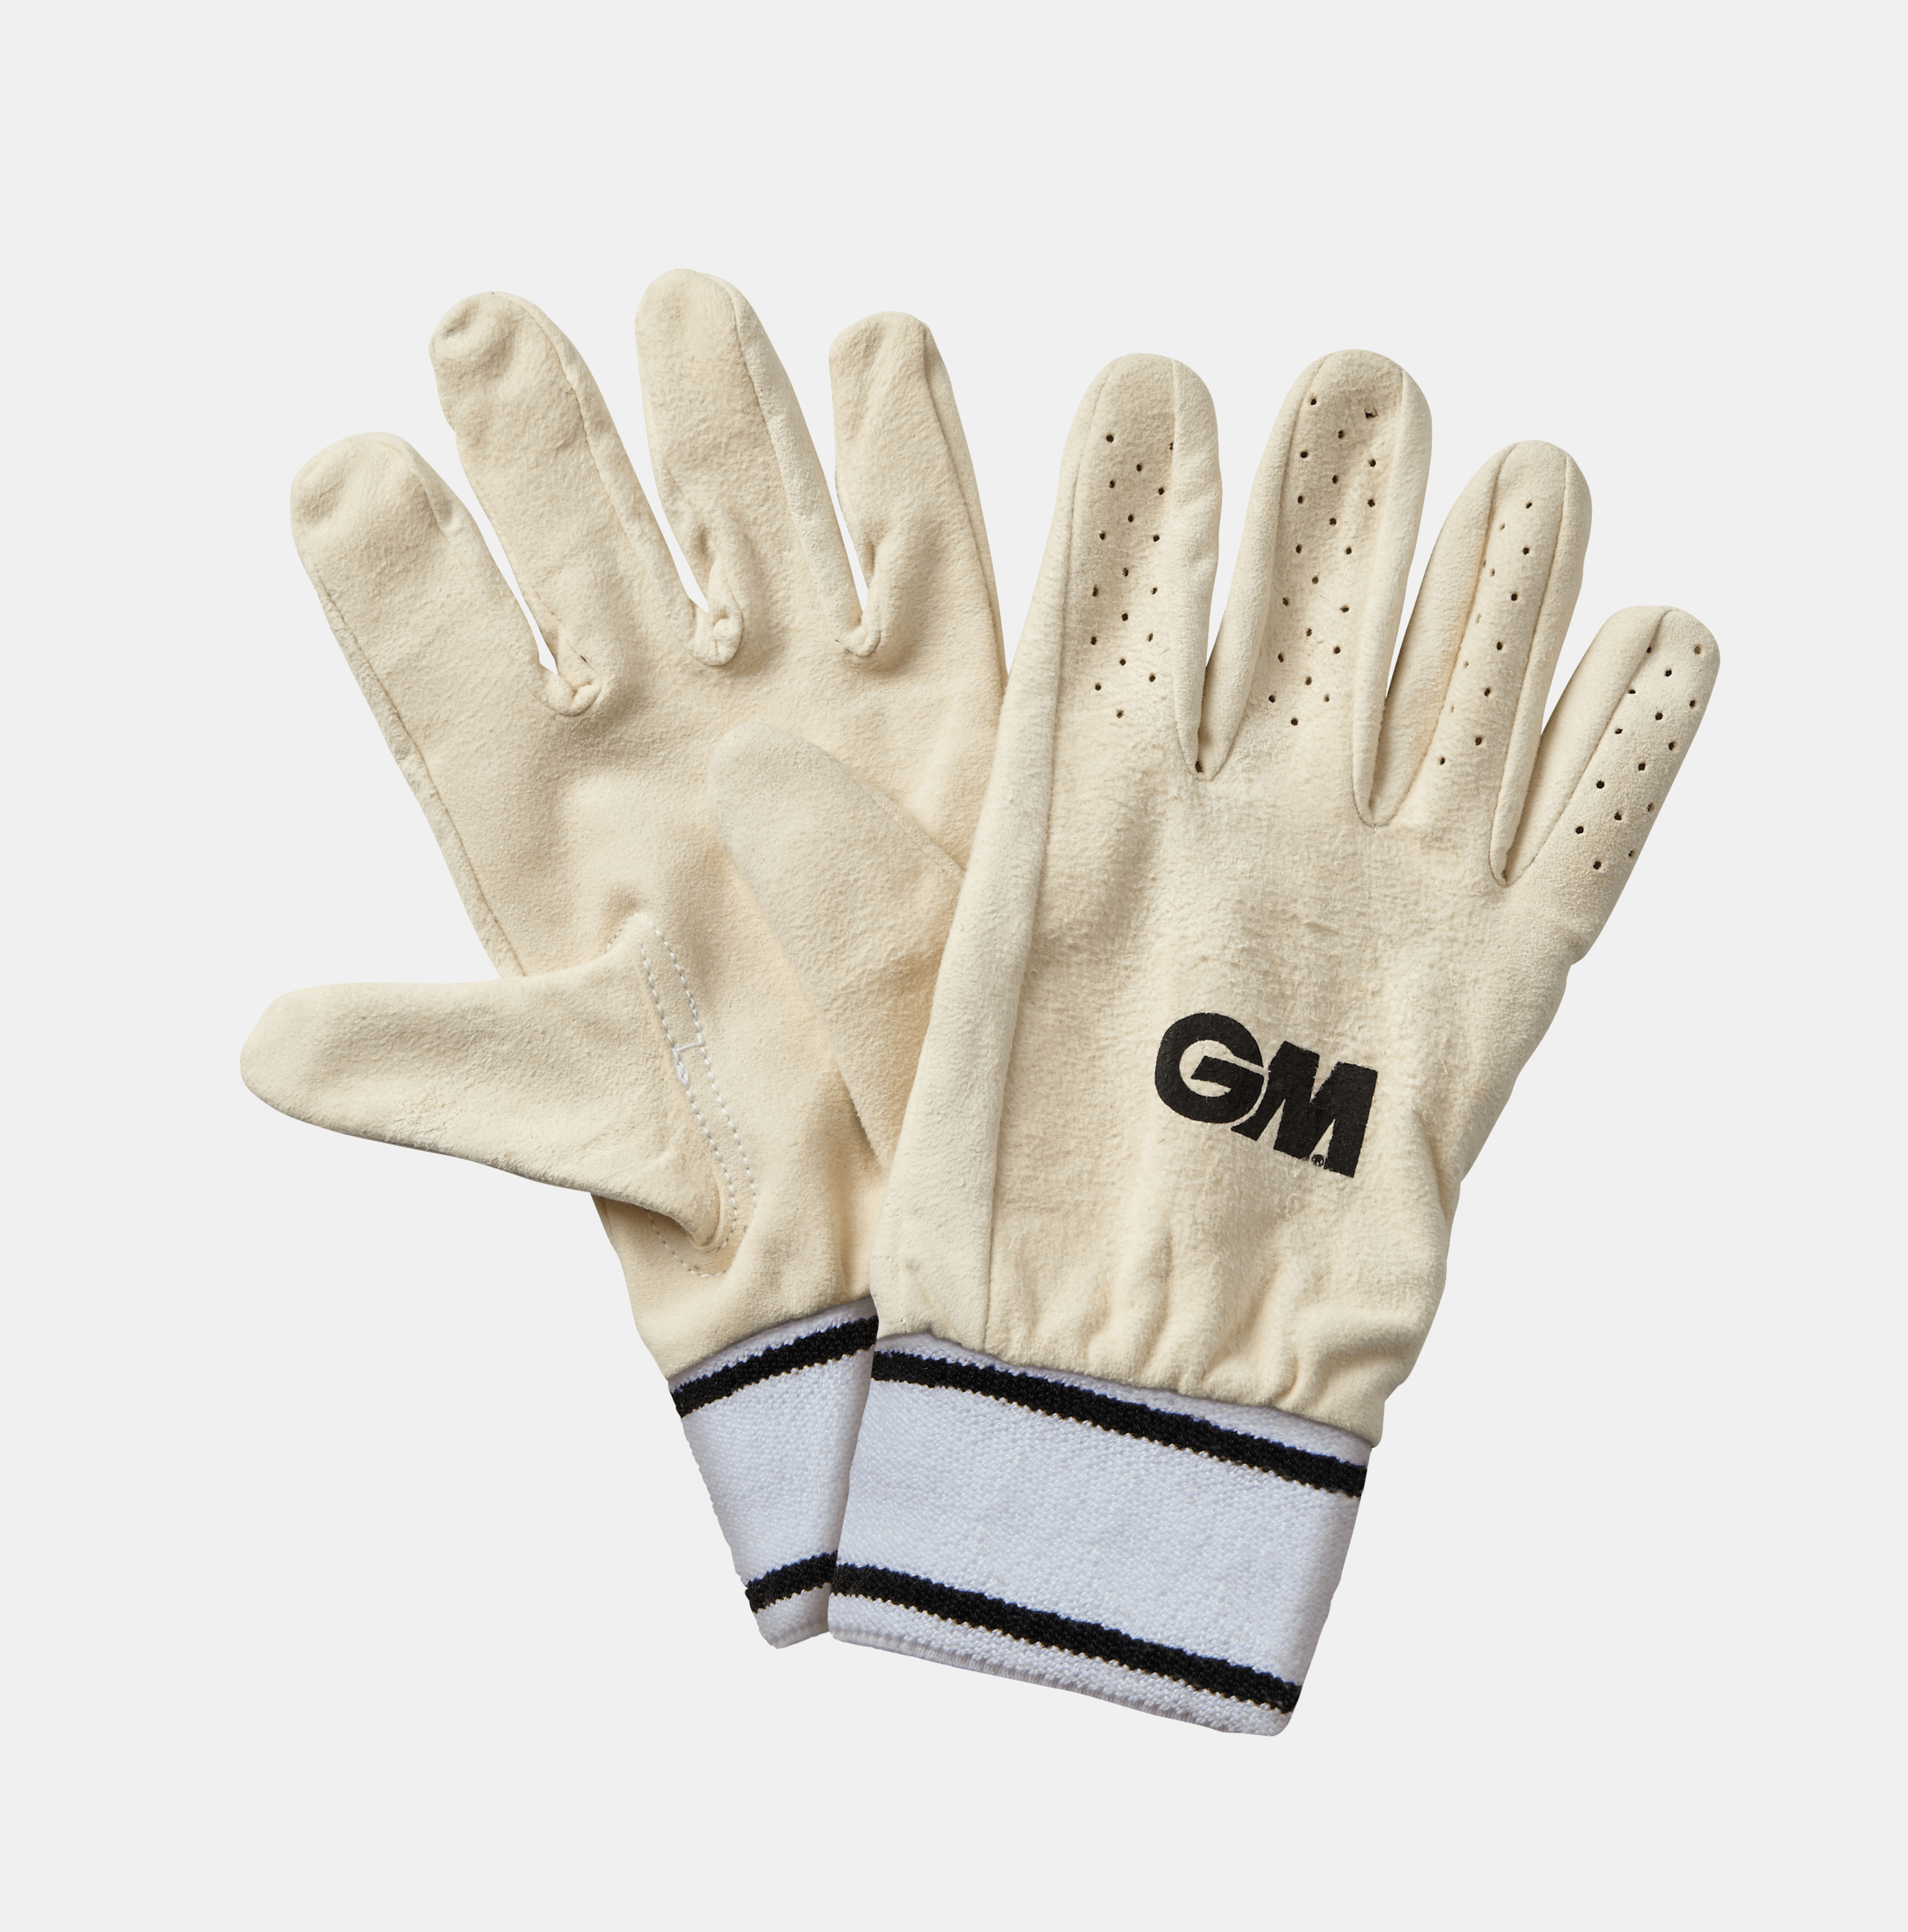 GM Full Chamois INNER Wicket Keeping Gloves - ADULT - AT Sports